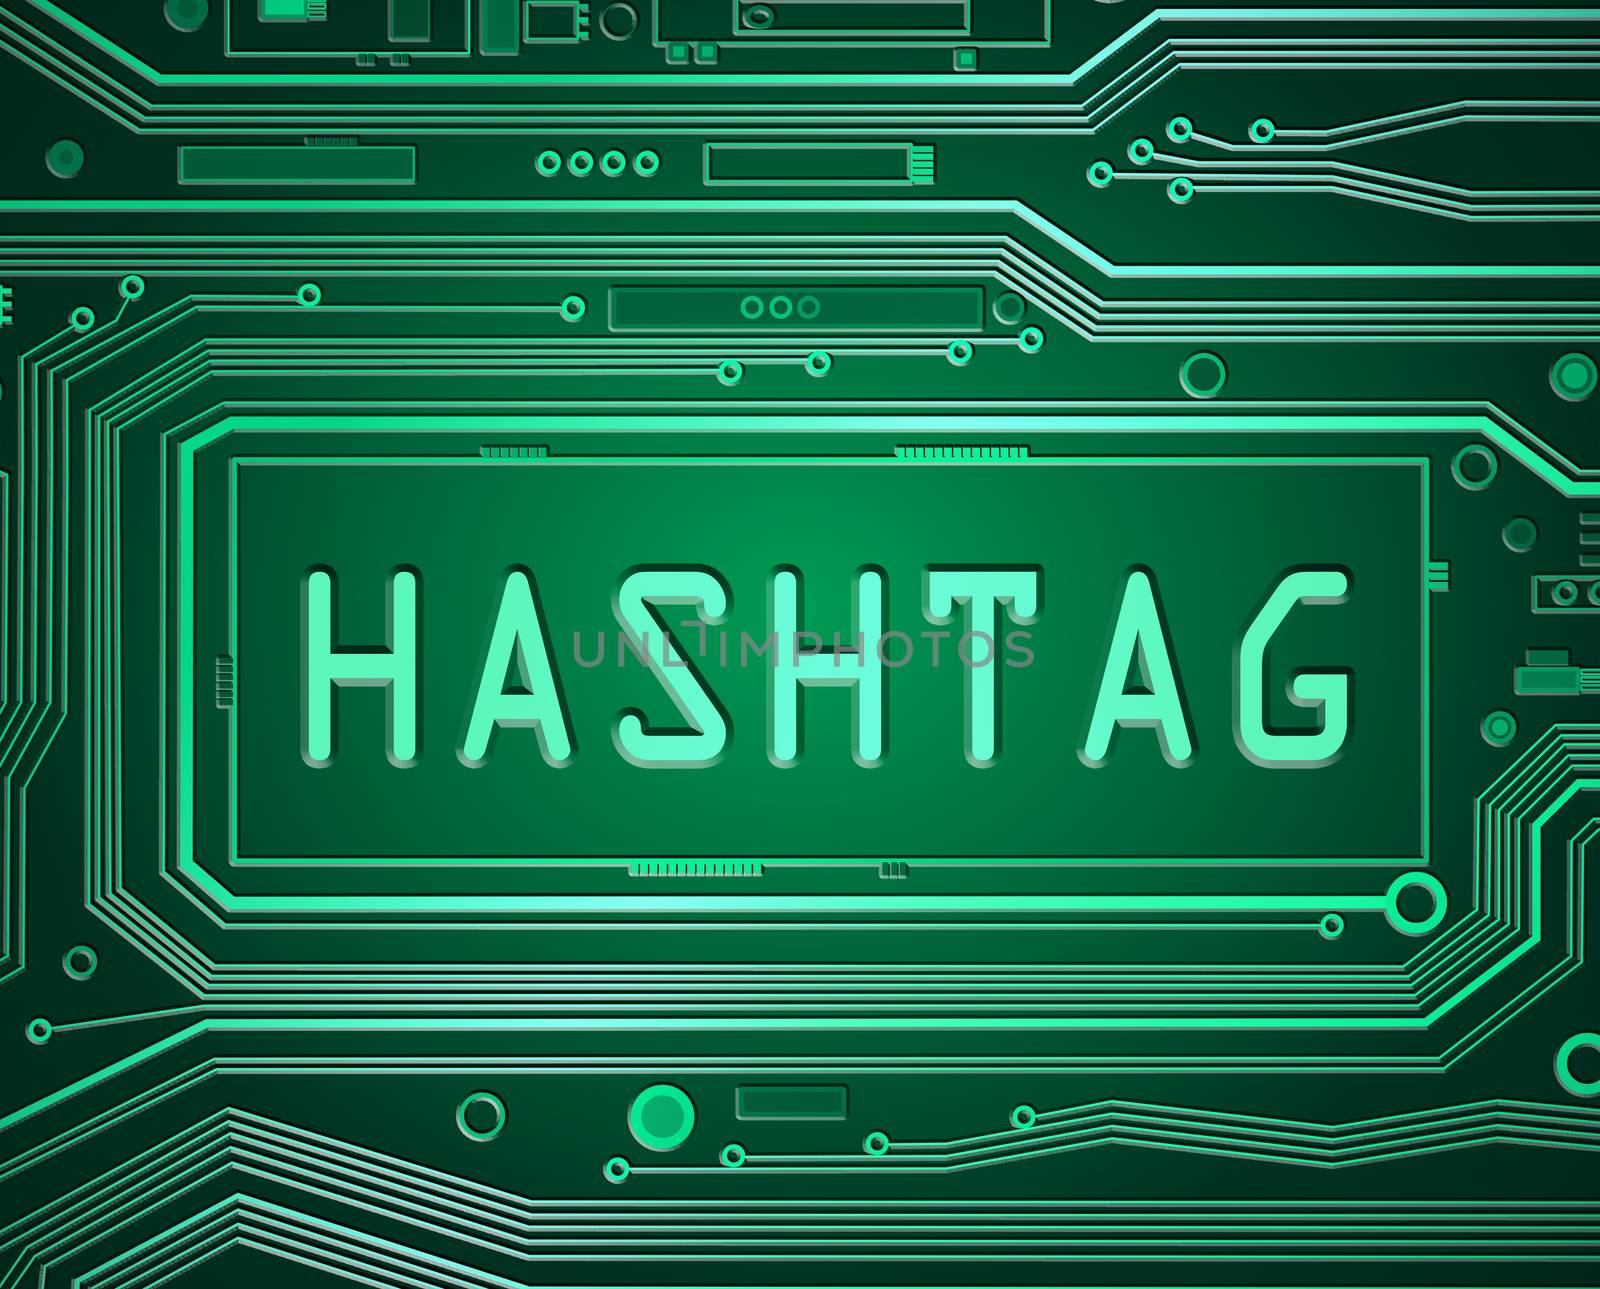 Abstract style illustration depicting printed circuit board components with a hashtag concept.